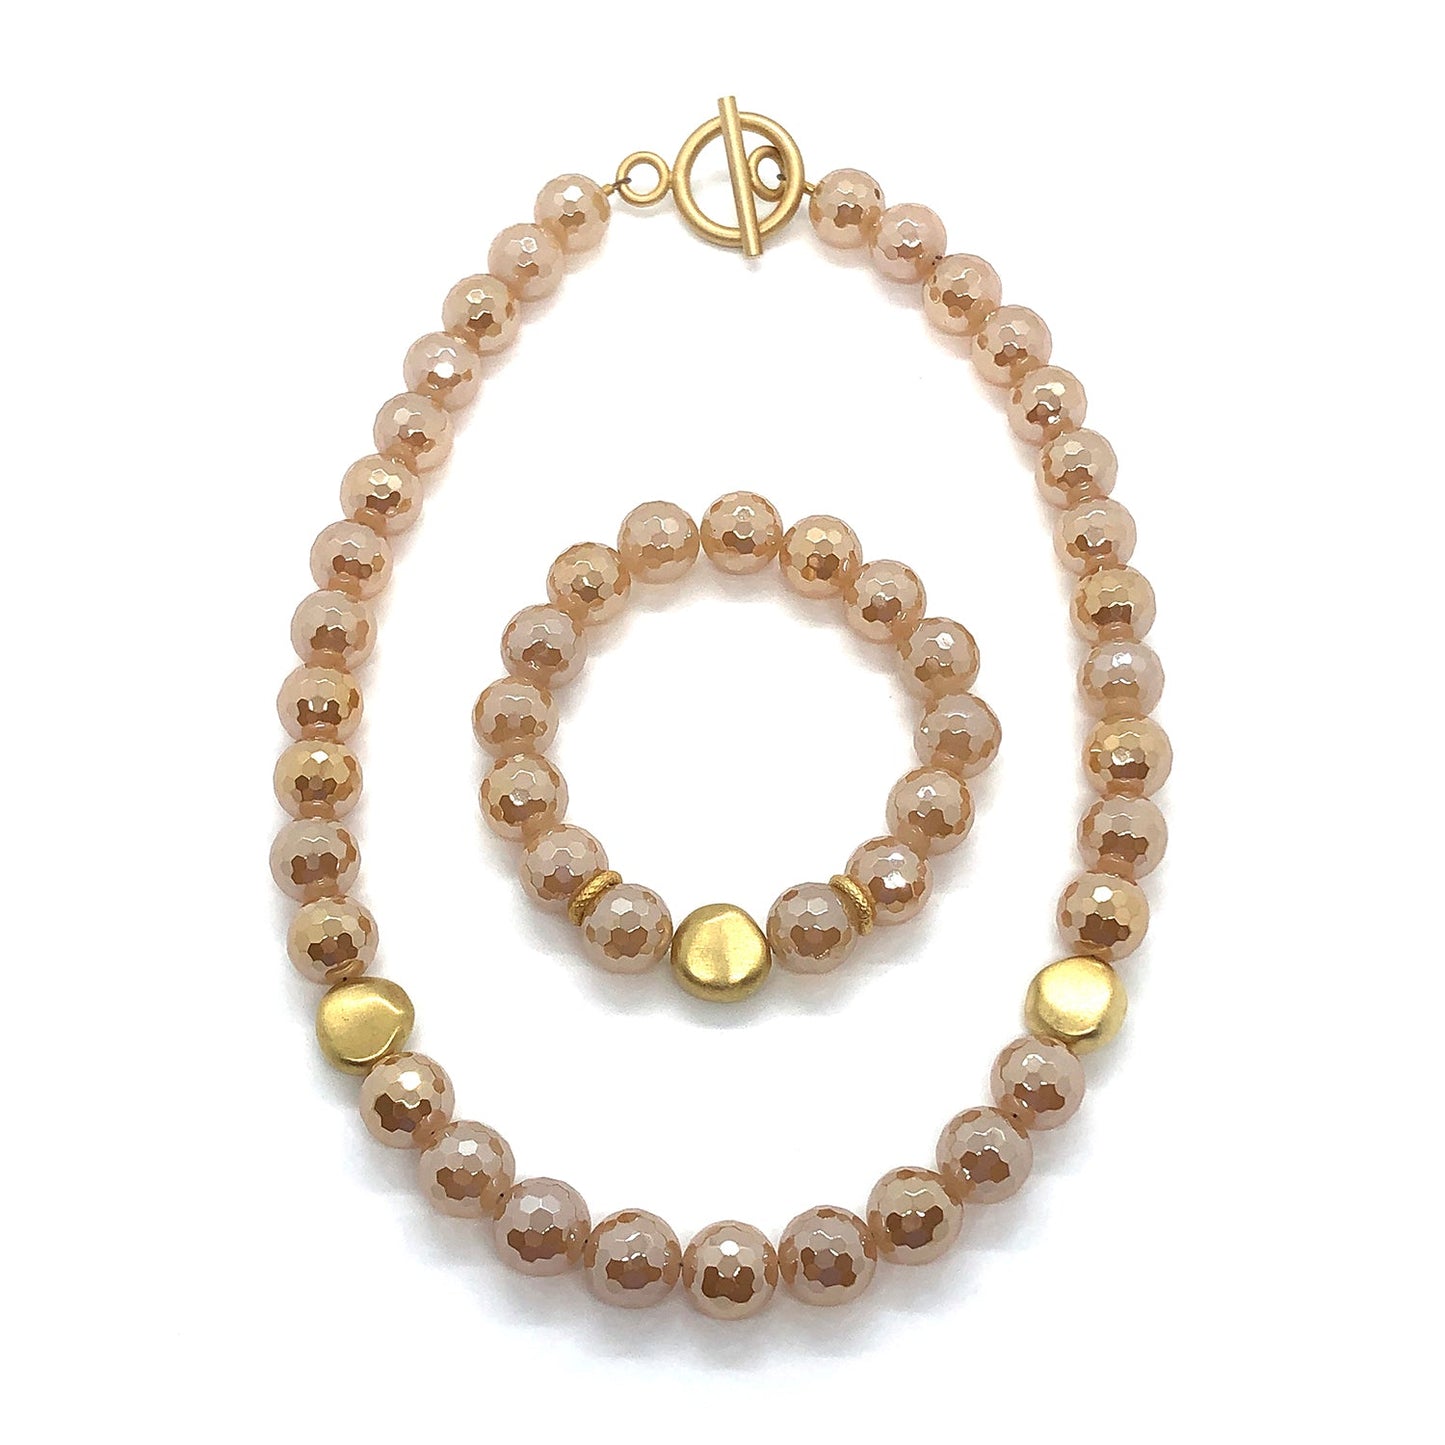 Champagne(Lco) Glazed Agate With Matte Gold Plate Beads Necklace And Flat Nugget Stretch  Bracelet